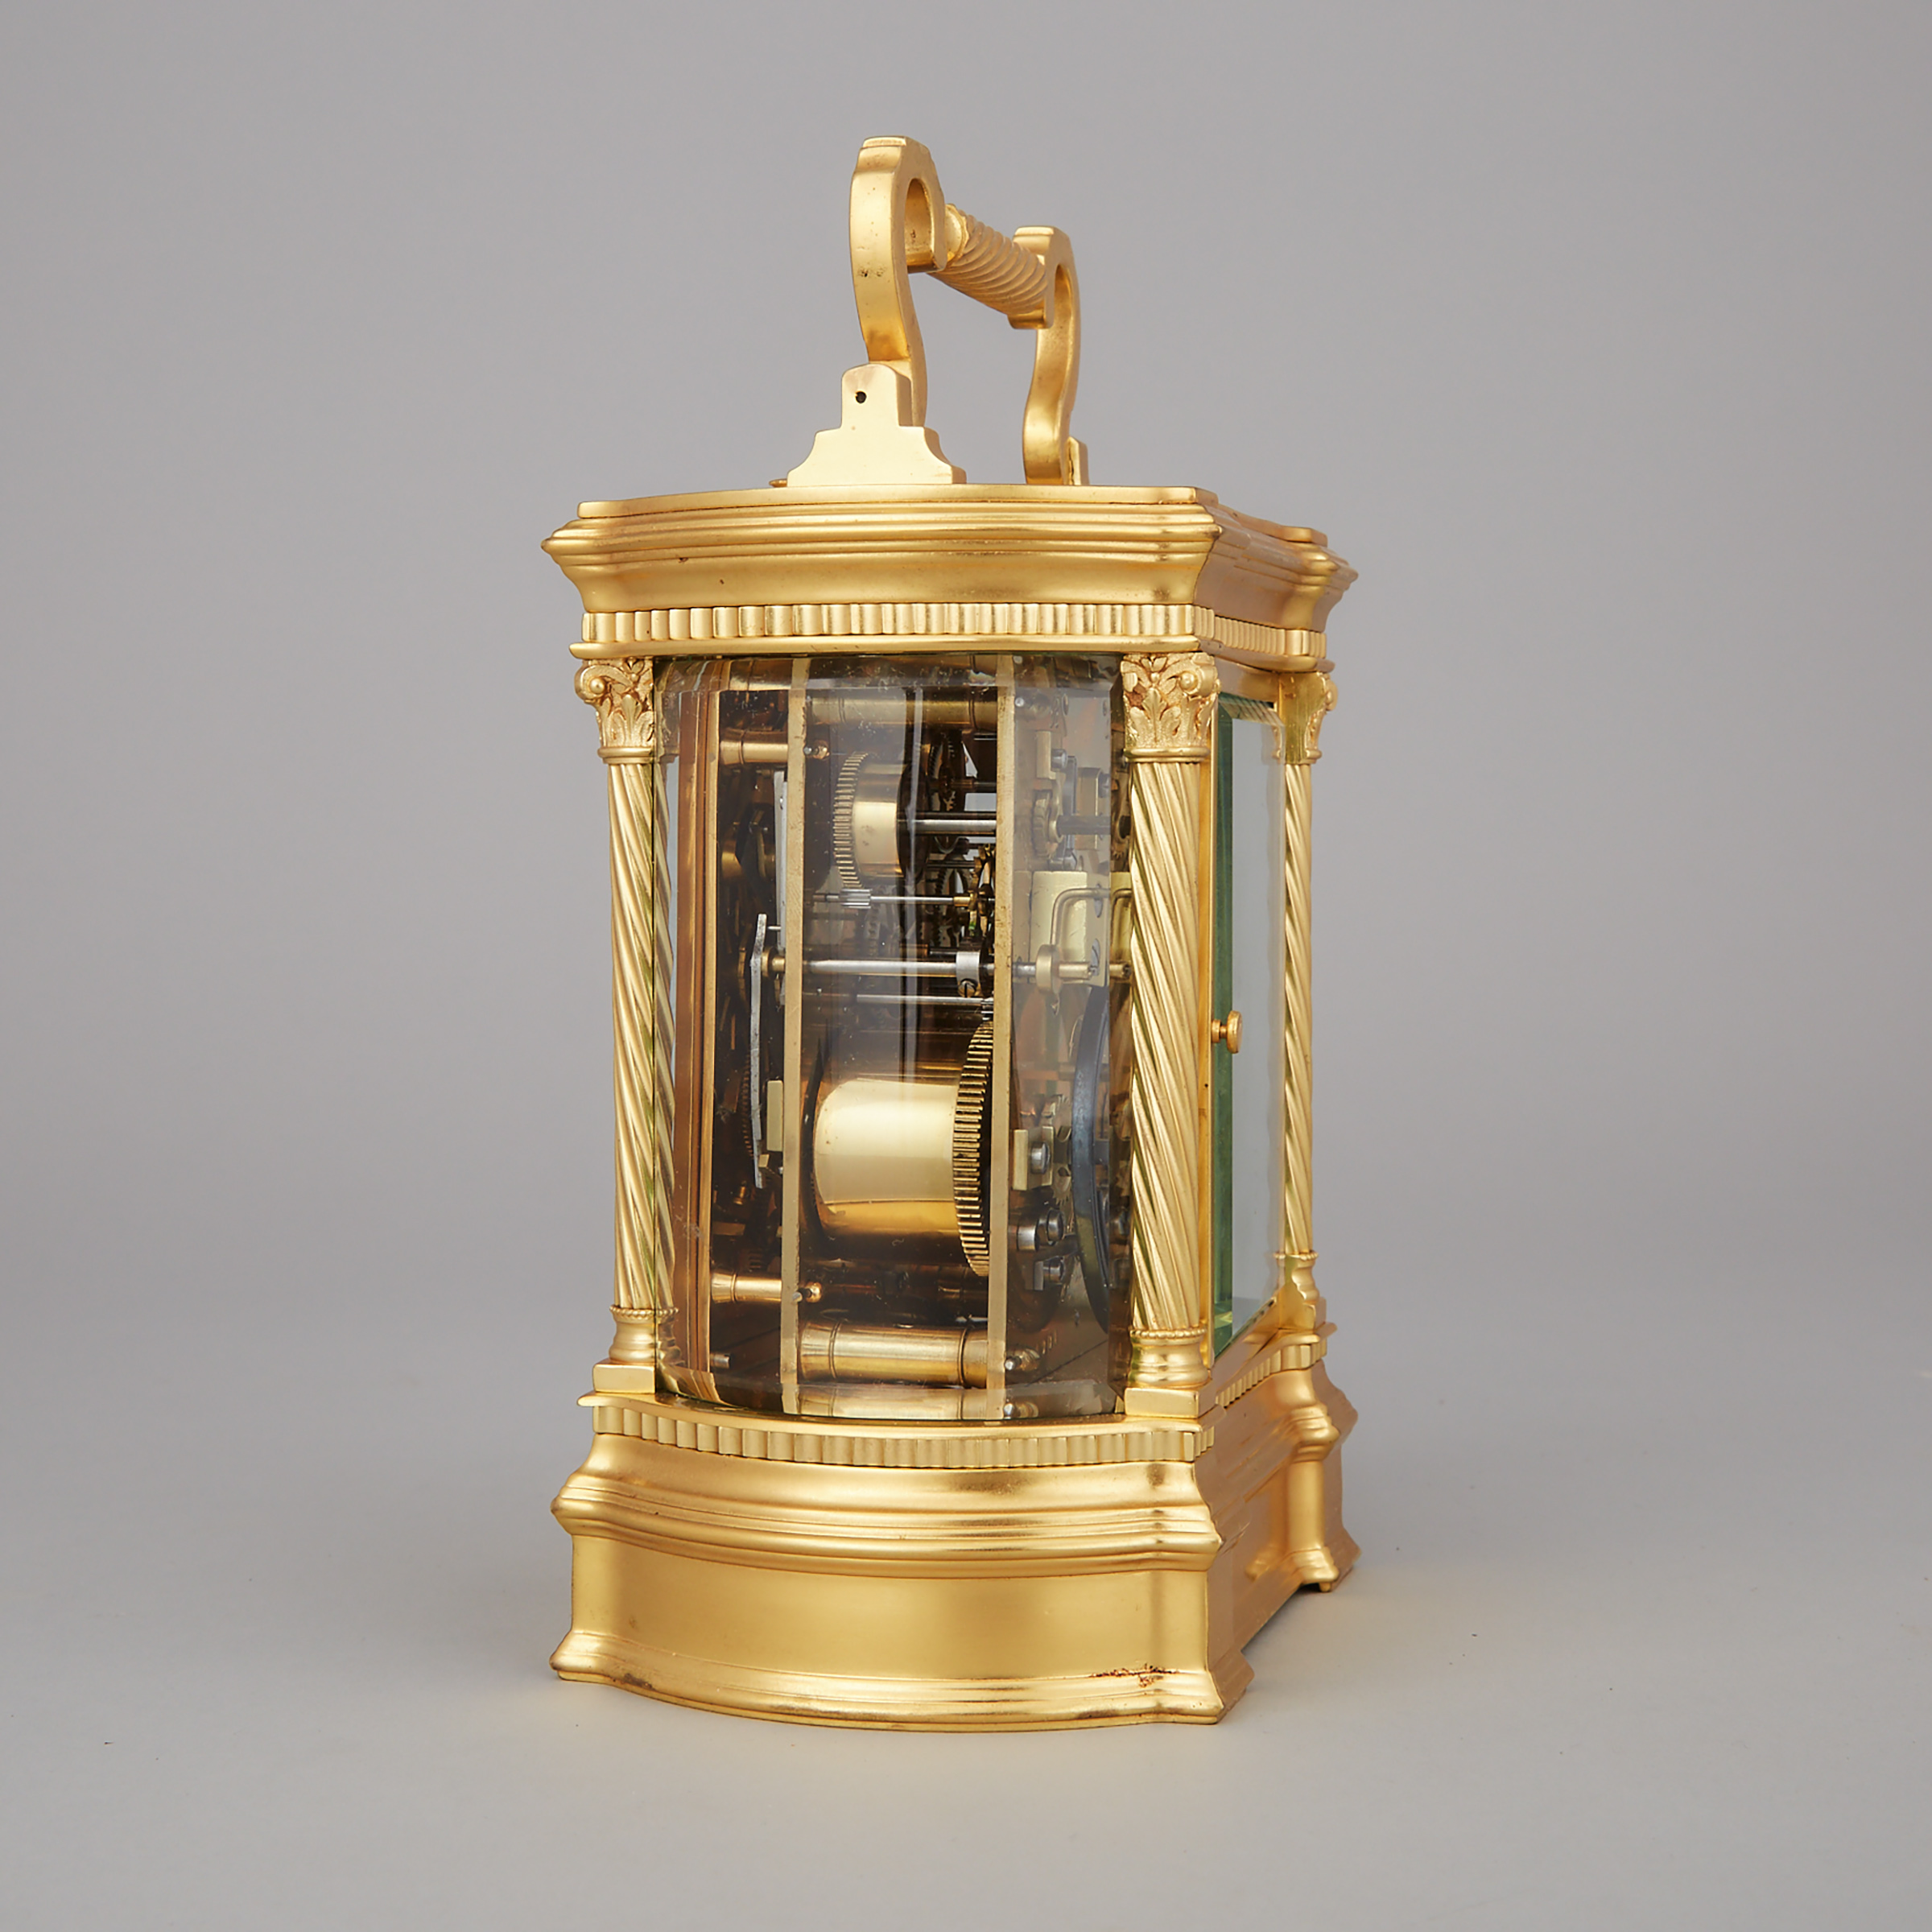 Victoria, Princess Royal and Frederick William III Presentation French Repeating Carriage Clock with Alarm, c.1880